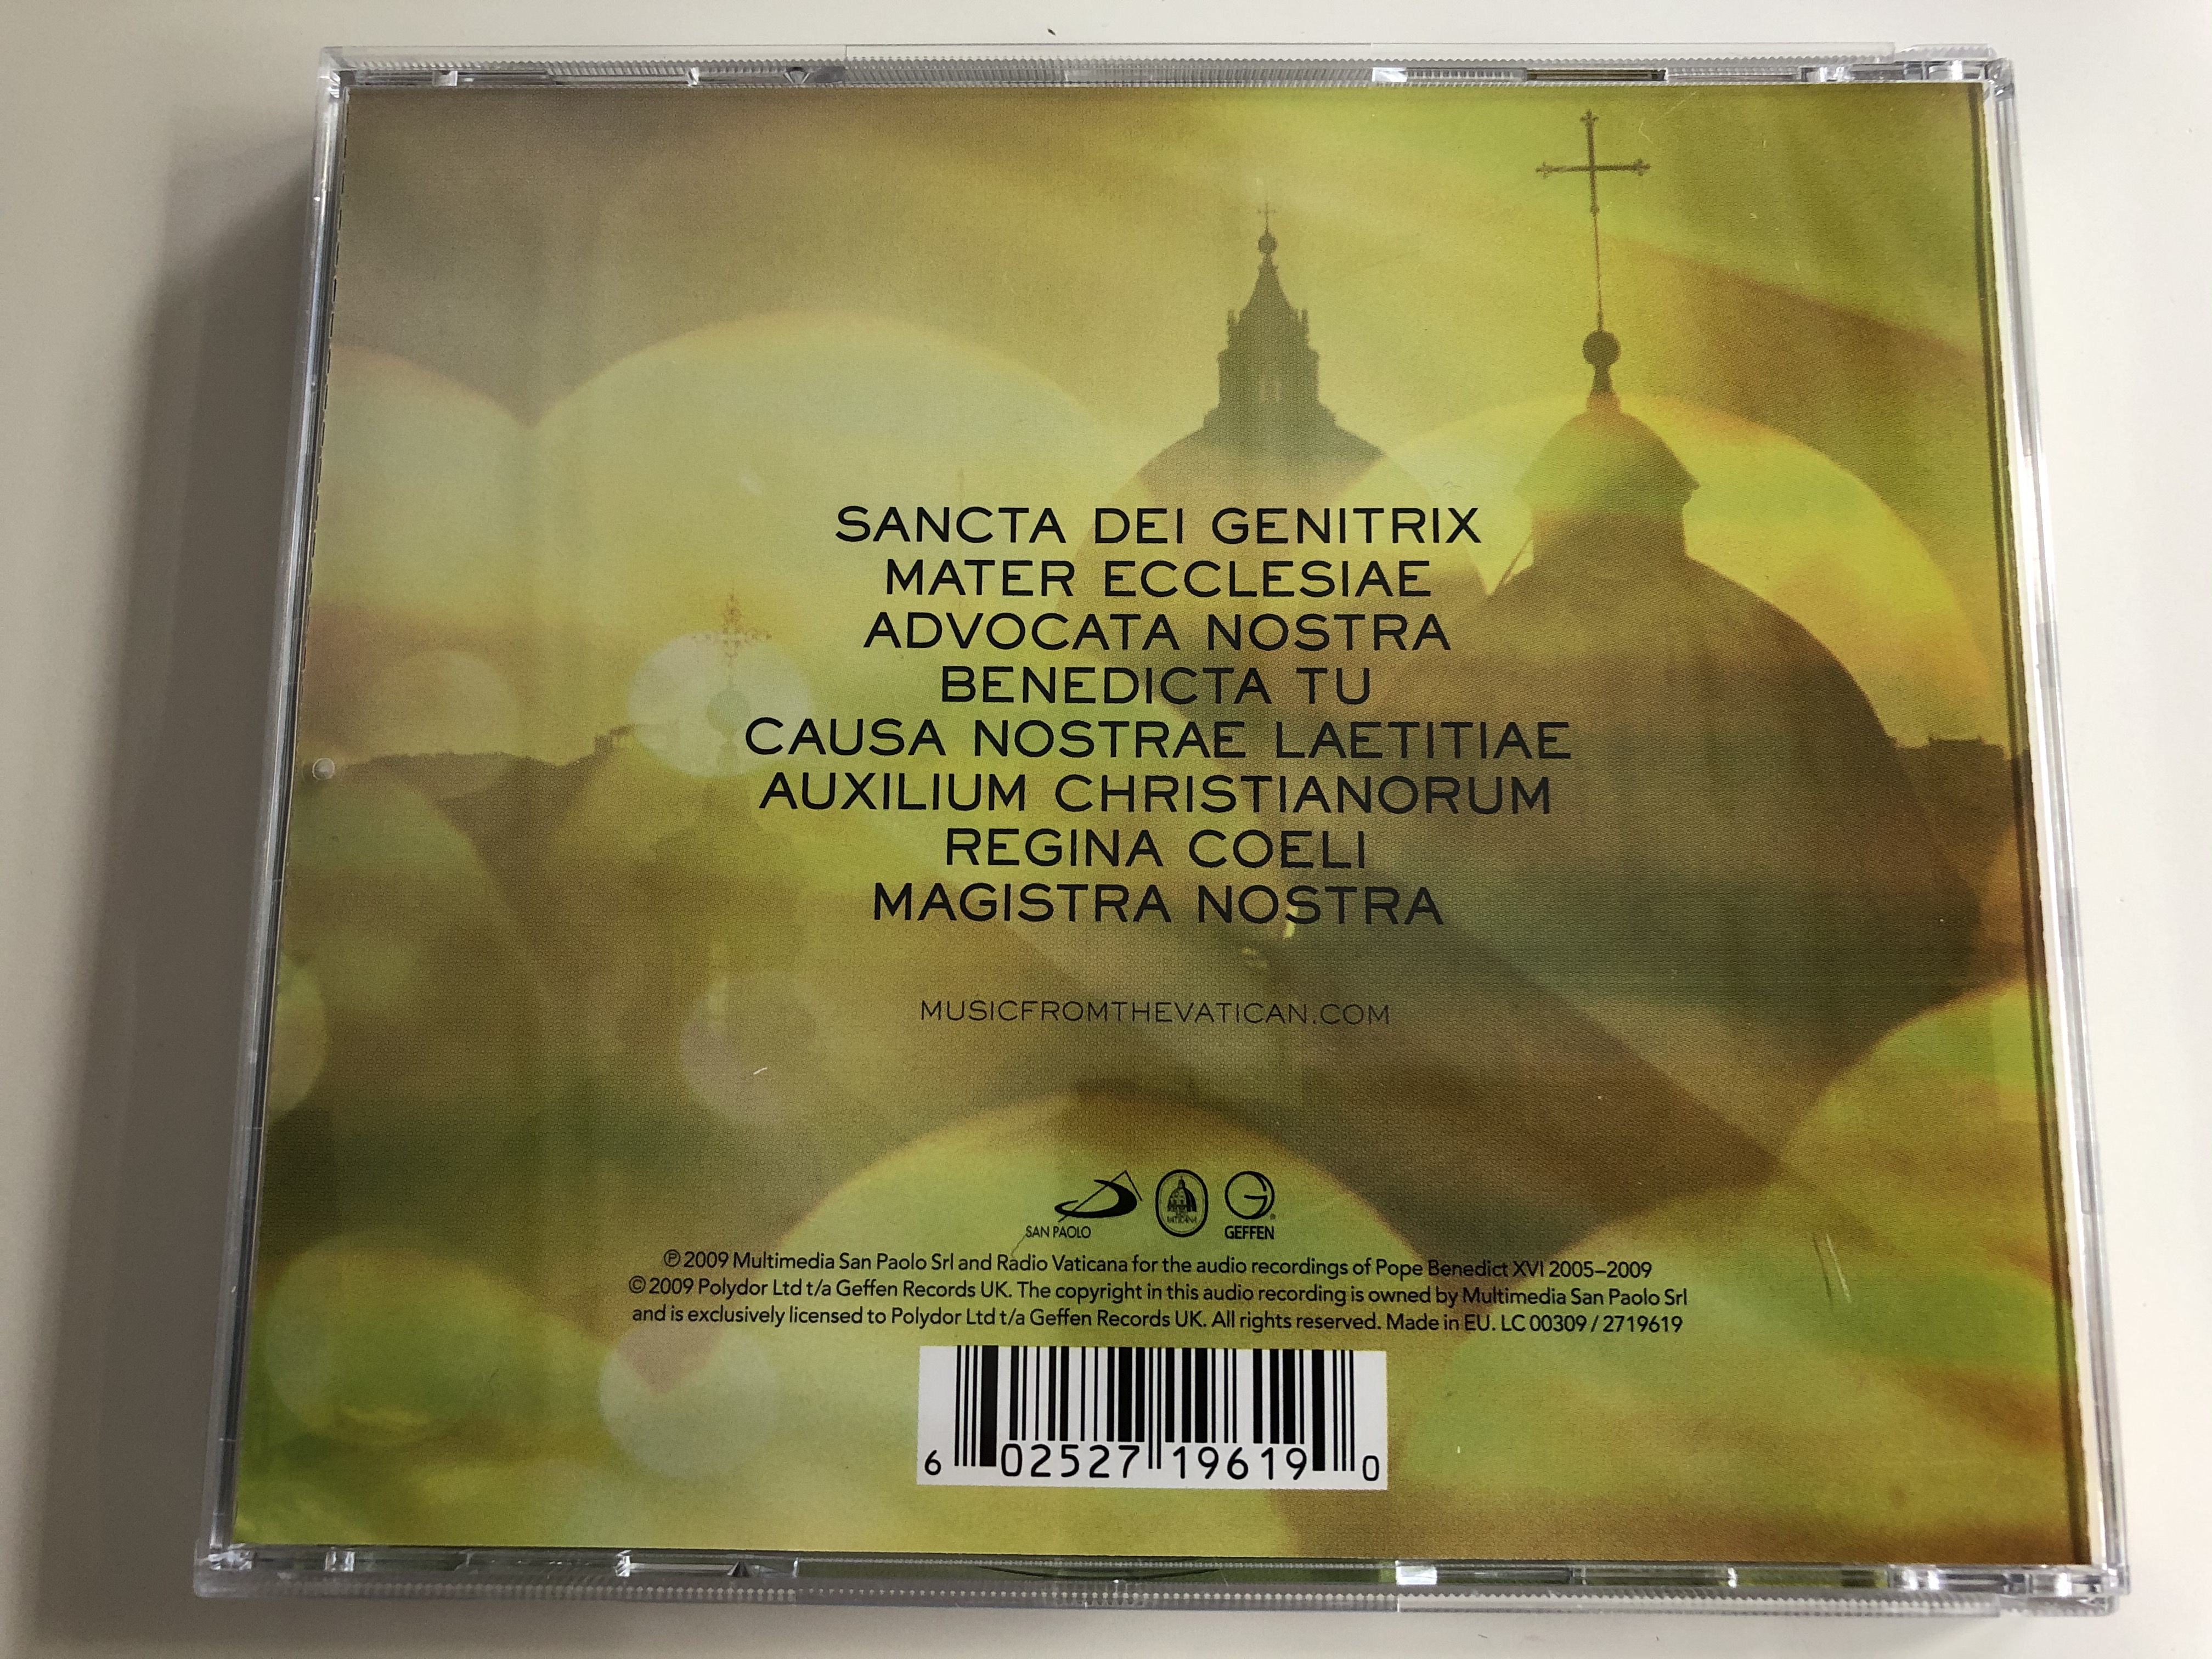 music-from-the-vatican-alma-mater-featuring-the-voice-of-pope-benedict-xvi-san-paolo-audio-cd-2009-2719619-15-.jpg